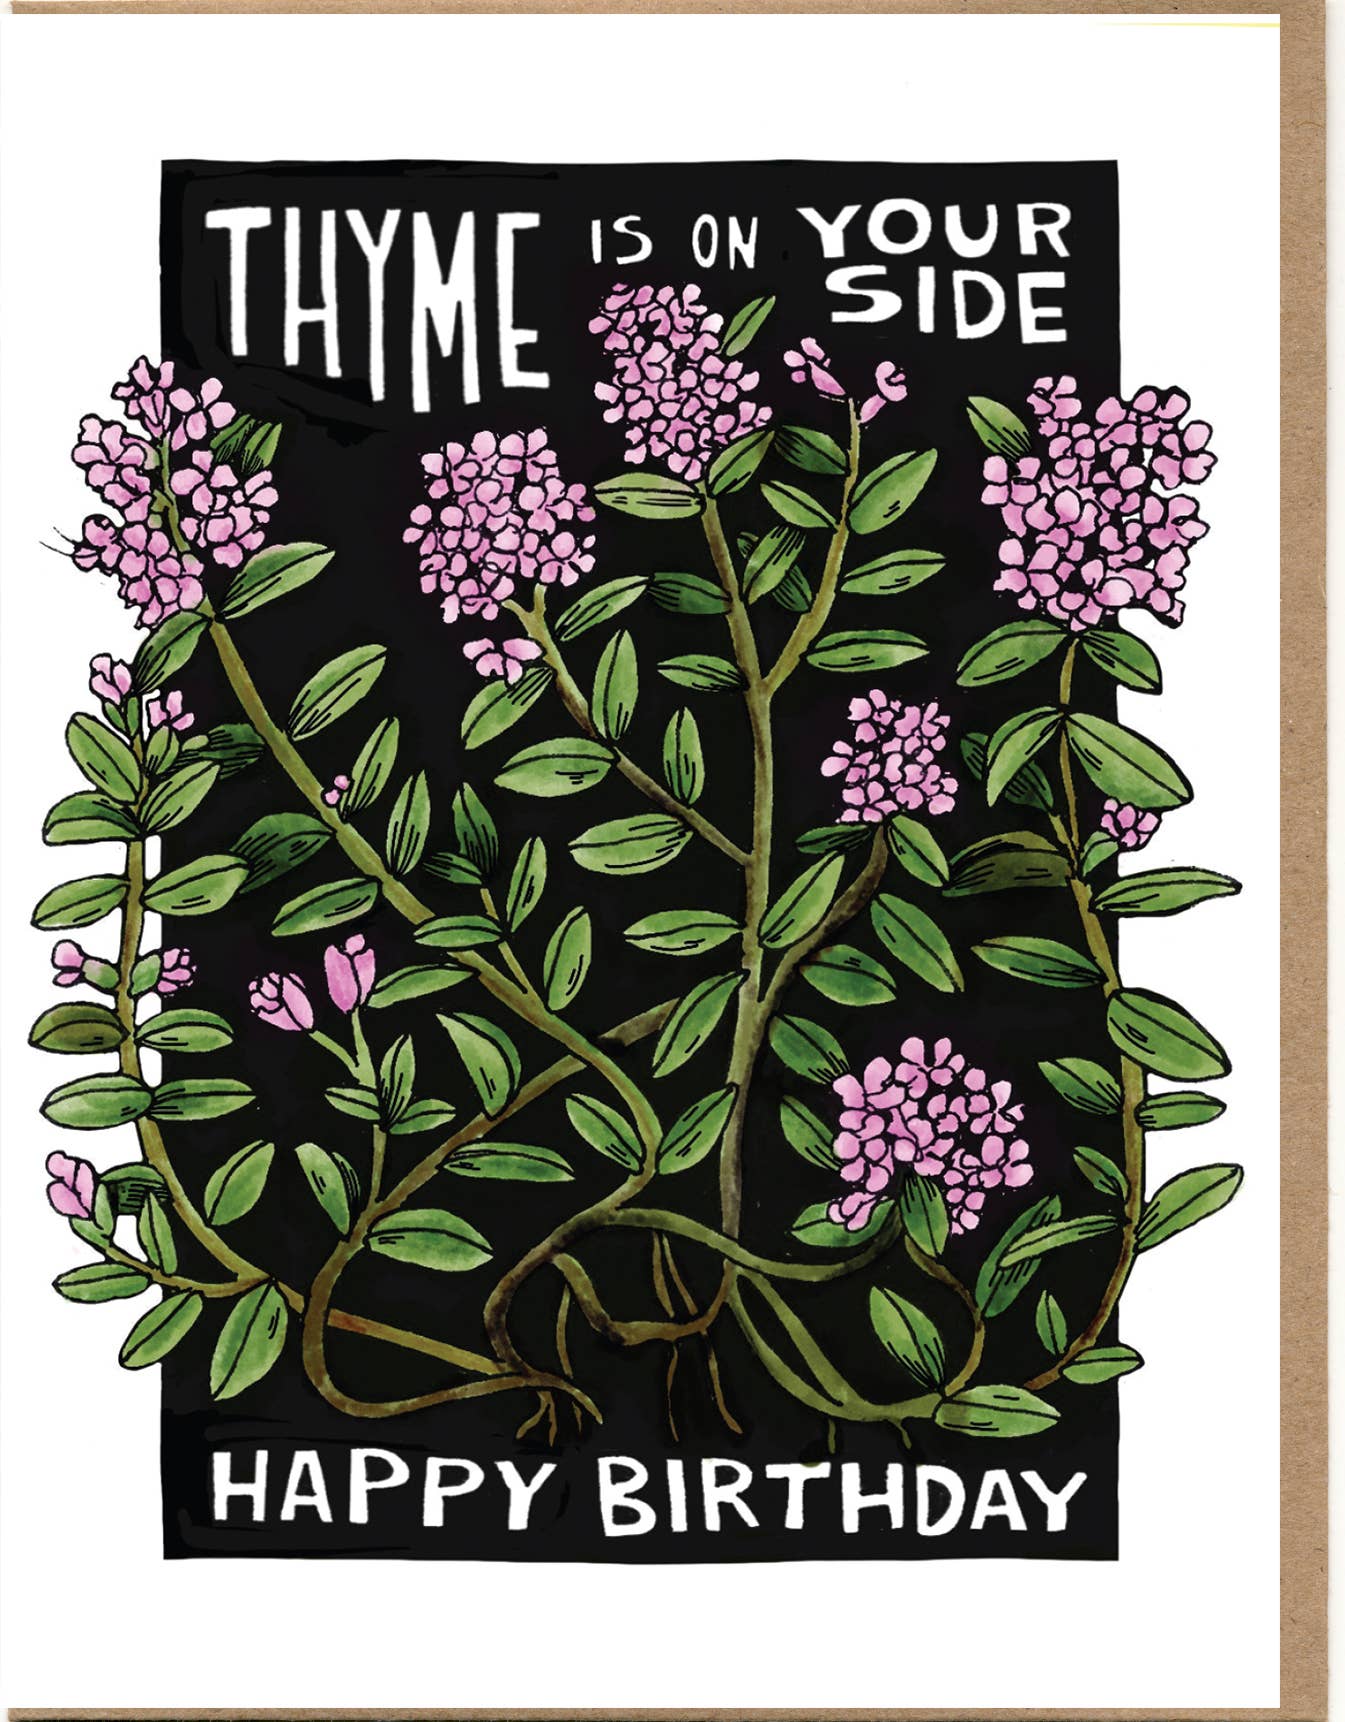 Thyme is on Your Side, Happy Birthday